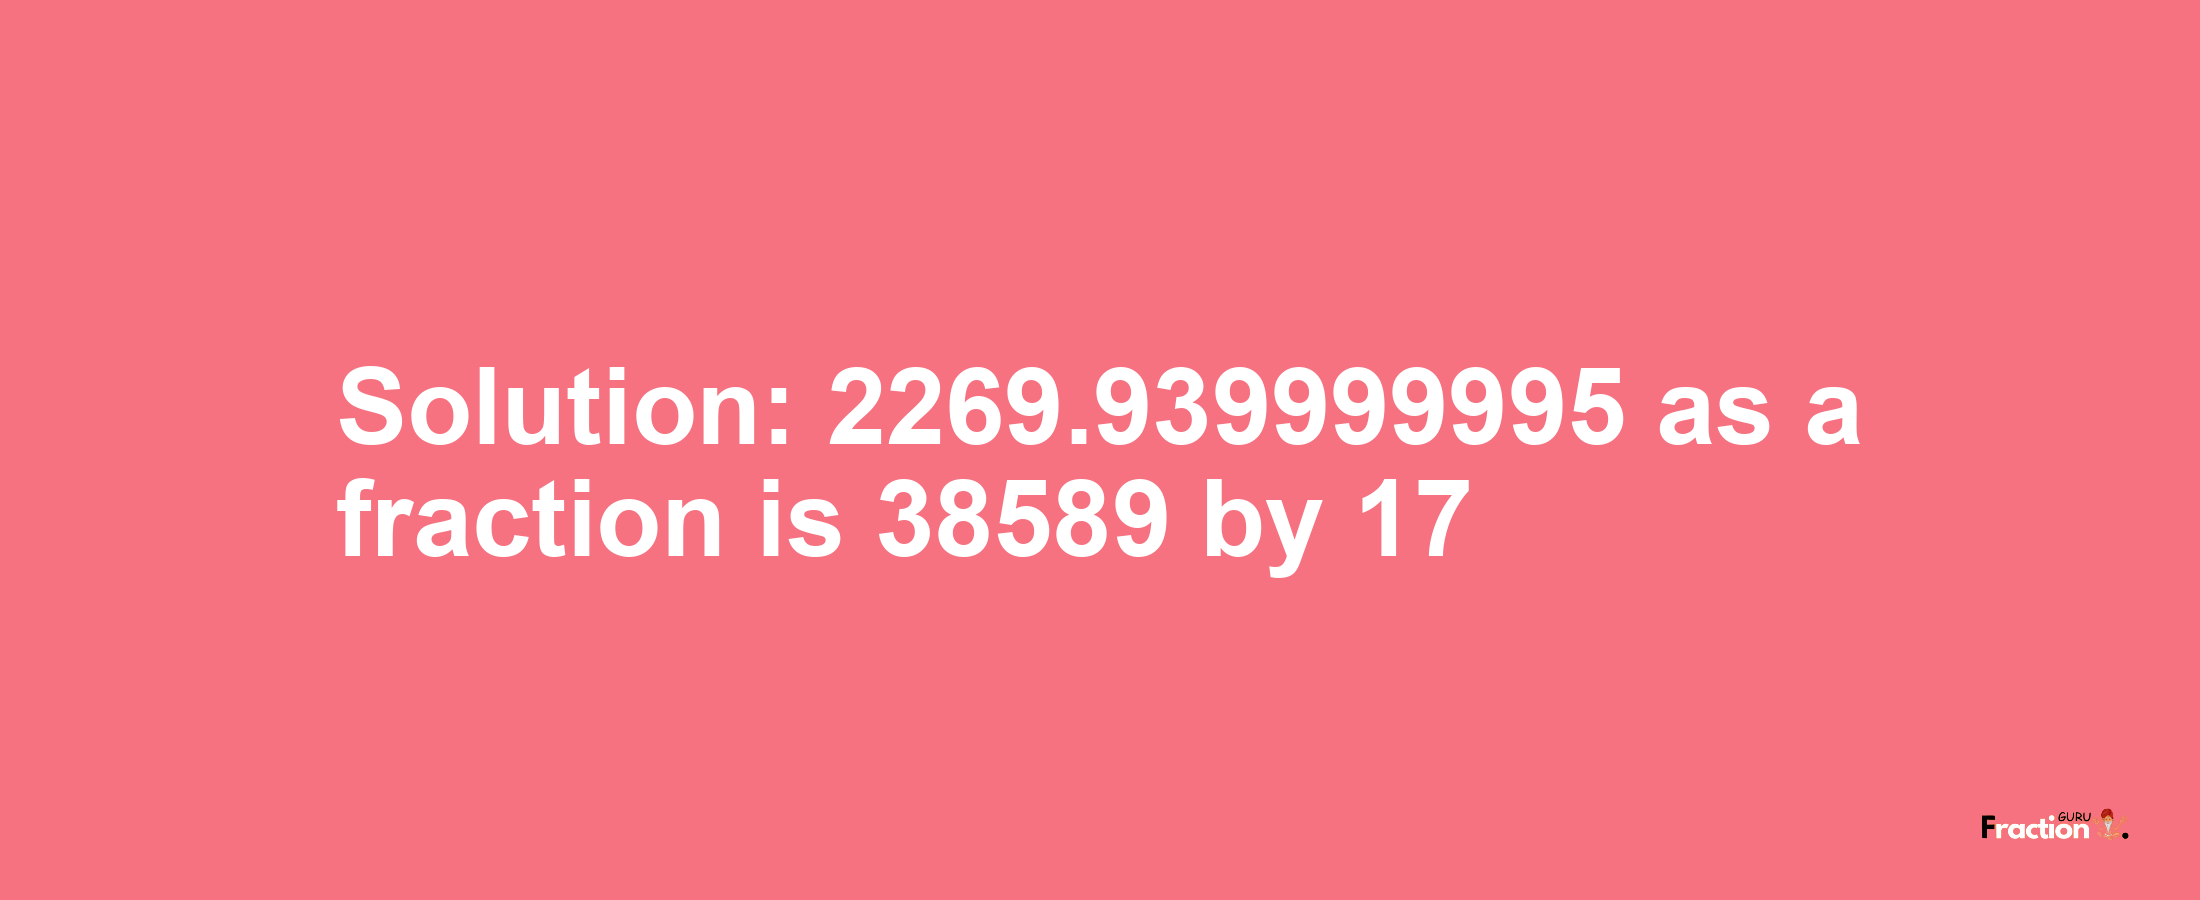 Solution:2269.939999995 as a fraction is 38589/17